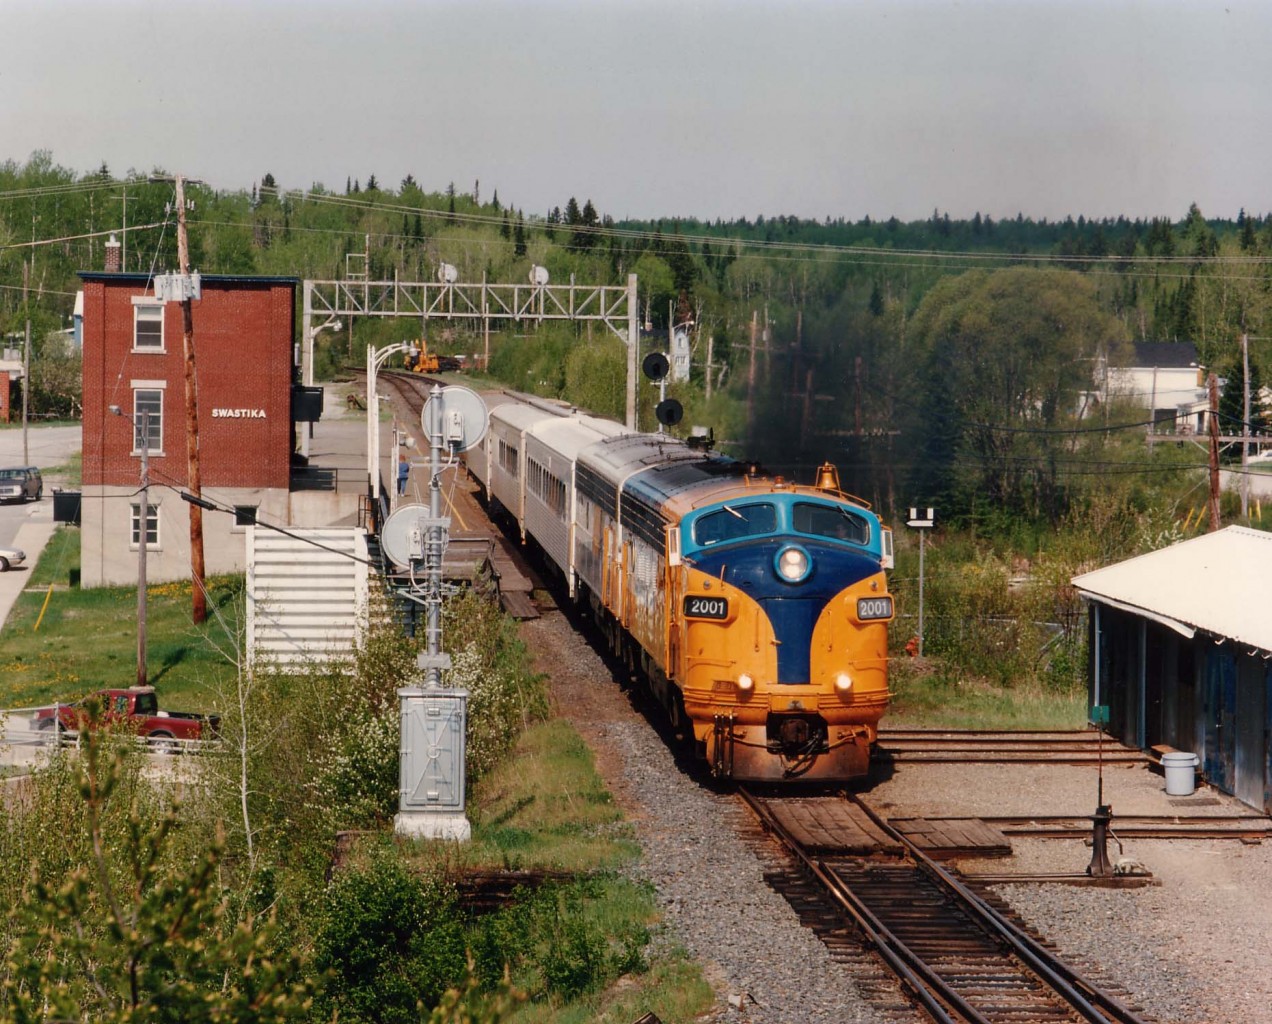 Mid-morning southbound ONR #122 with 2001,205 for power accelerates out of Swaskita, Ont. The leader is the former 1509 and was retired 2004, scrapped 2008.